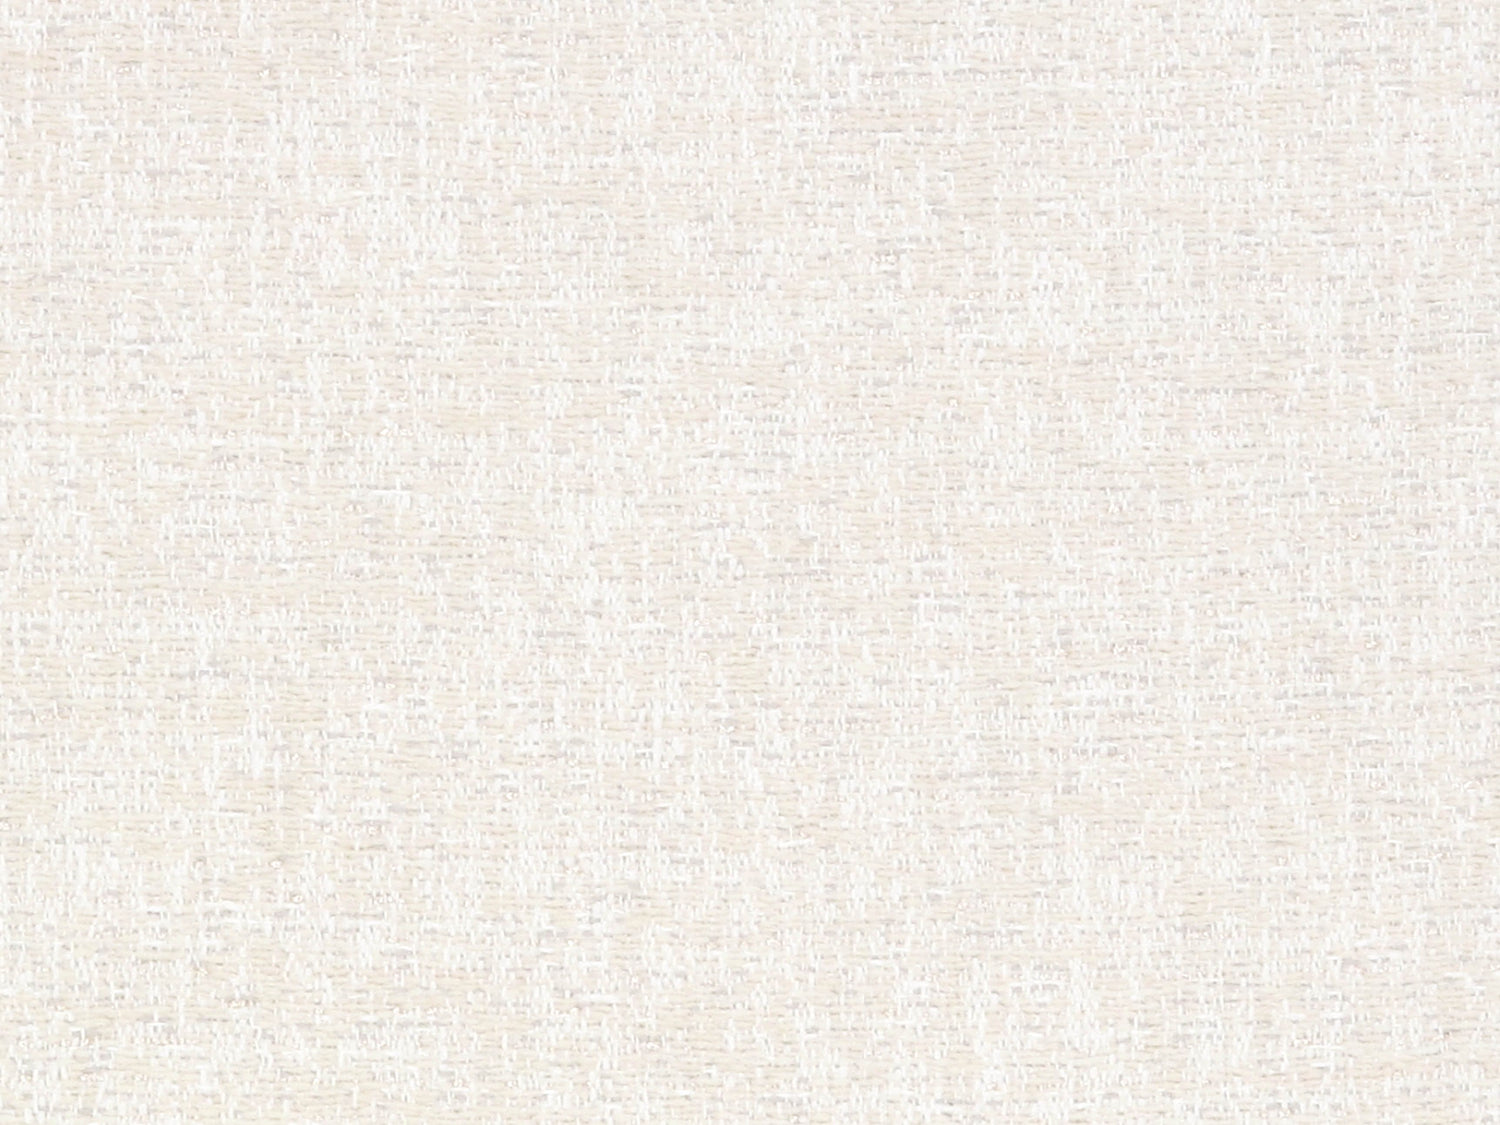 Belle Neige fabric in winter white color - pattern number EY 0028D012 - by Scalamandre in the Old World Weavers collection